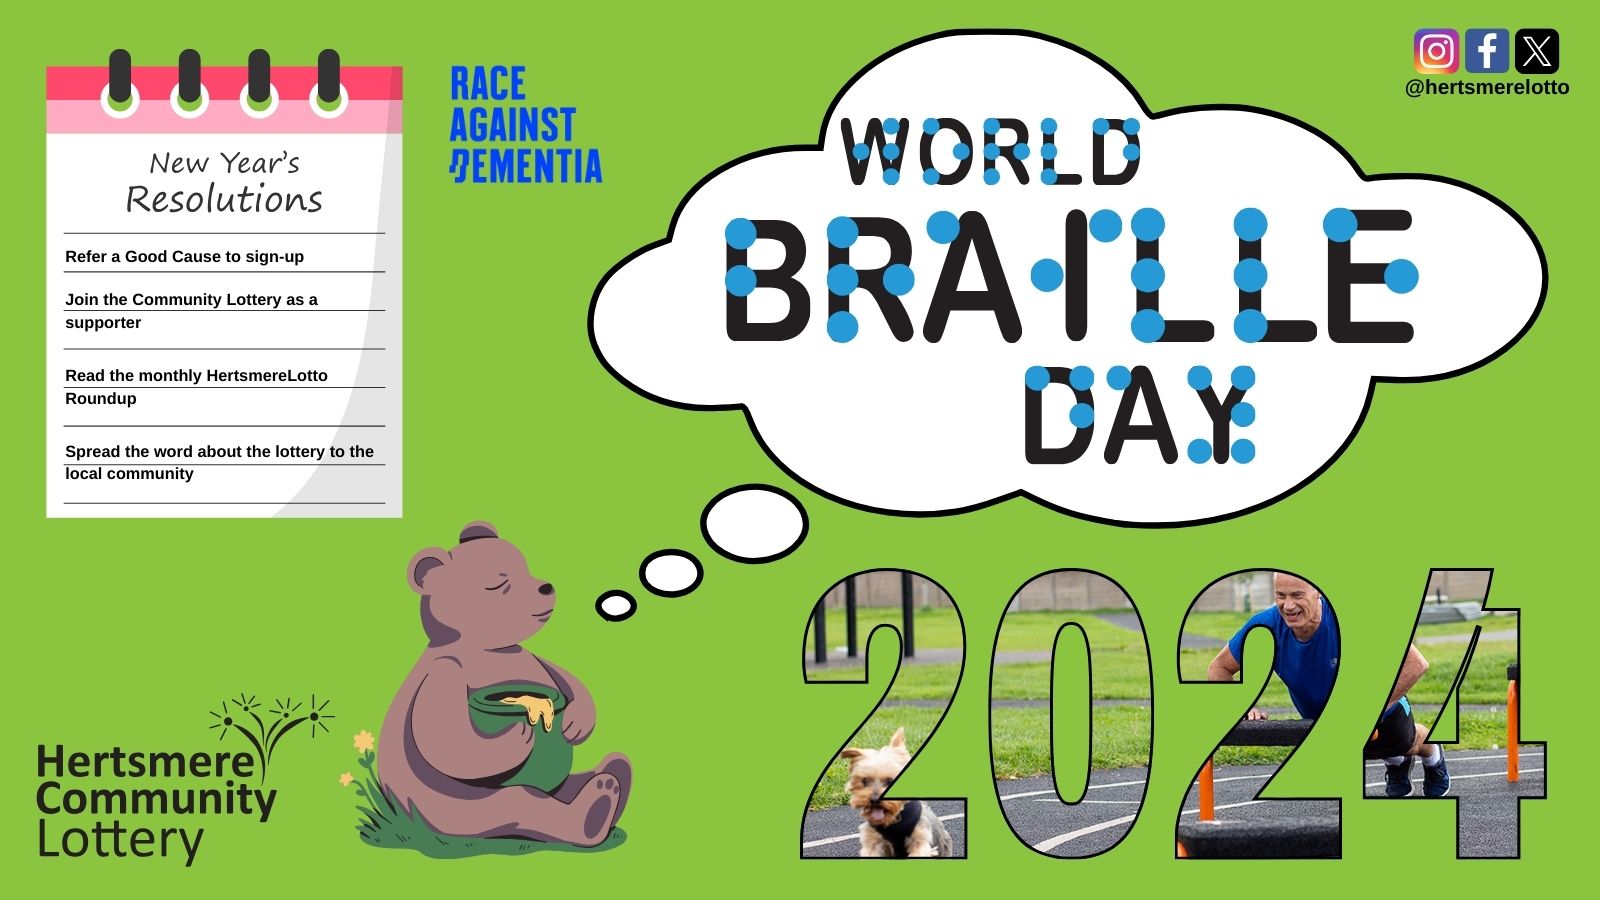 bear eating honey with thought bubble saying world braille day inside. new years resolutions on right hand side